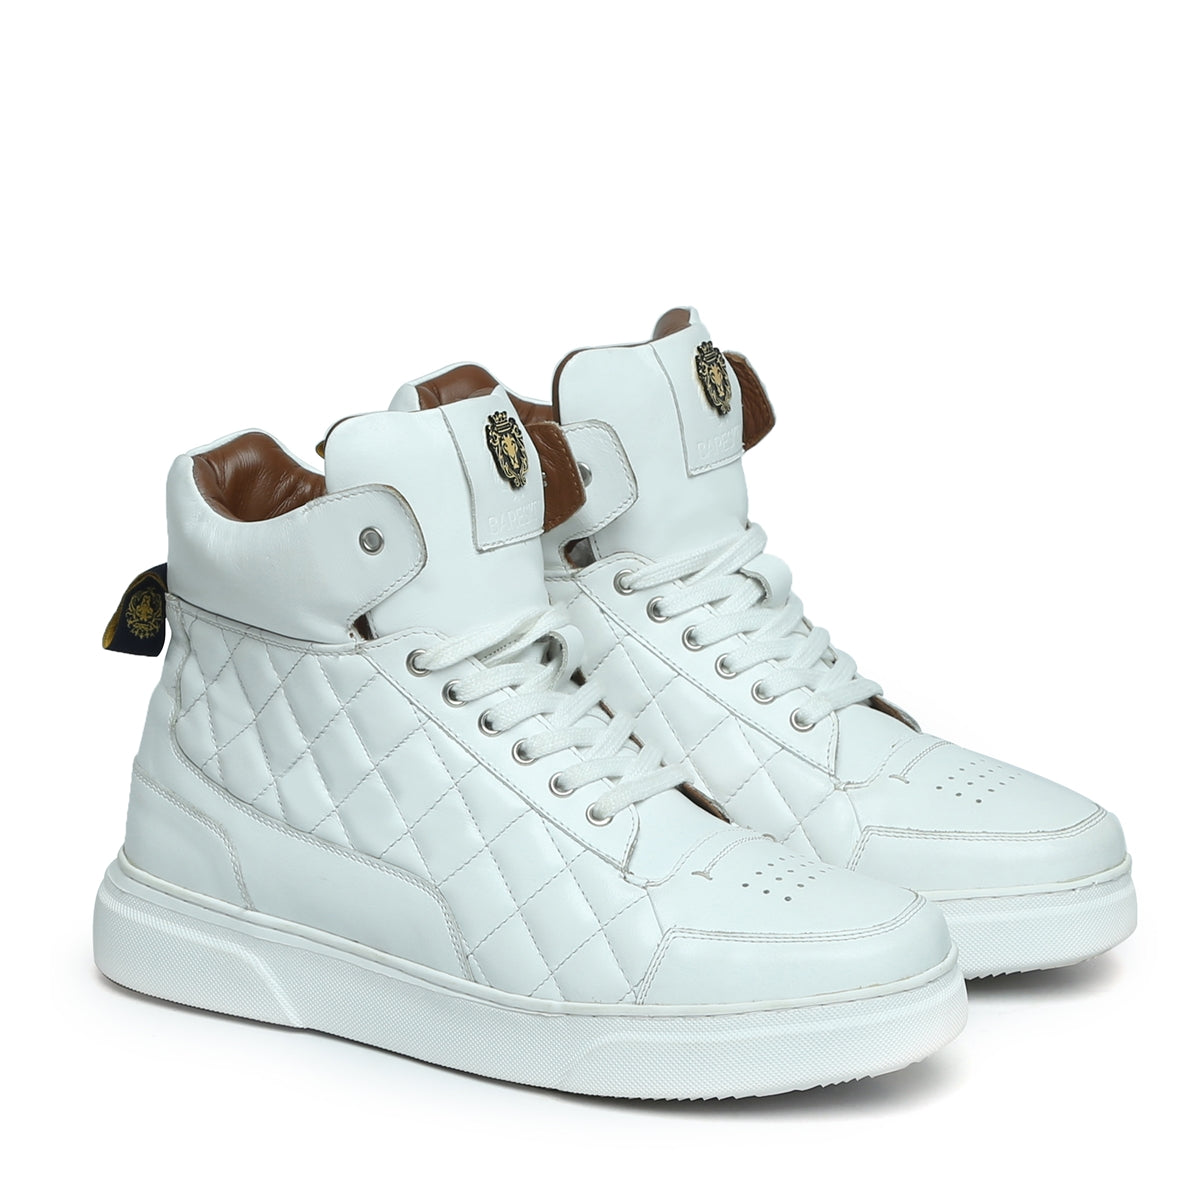 Mid-Top White Leather Sneaker with Diamond Stitch Pattern by Brune & Bareskin